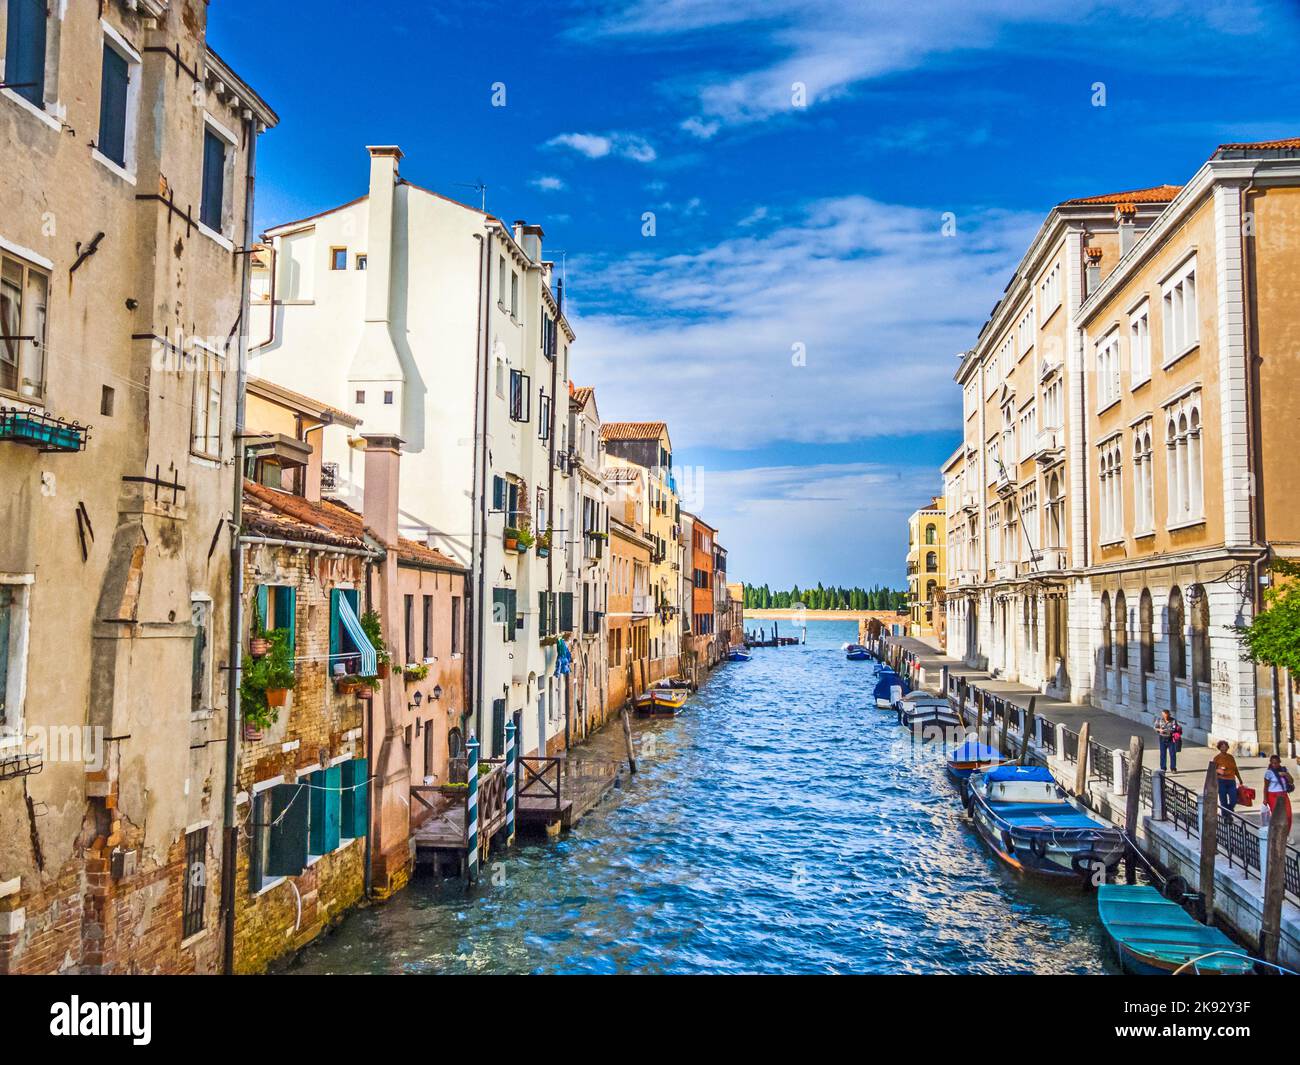 VENICE, ITALY - SEP 13, 2014: Narrow Canal Lined with Low Rise Buildings, Iconic Canal Scene in Venice, Italy Stock Photo